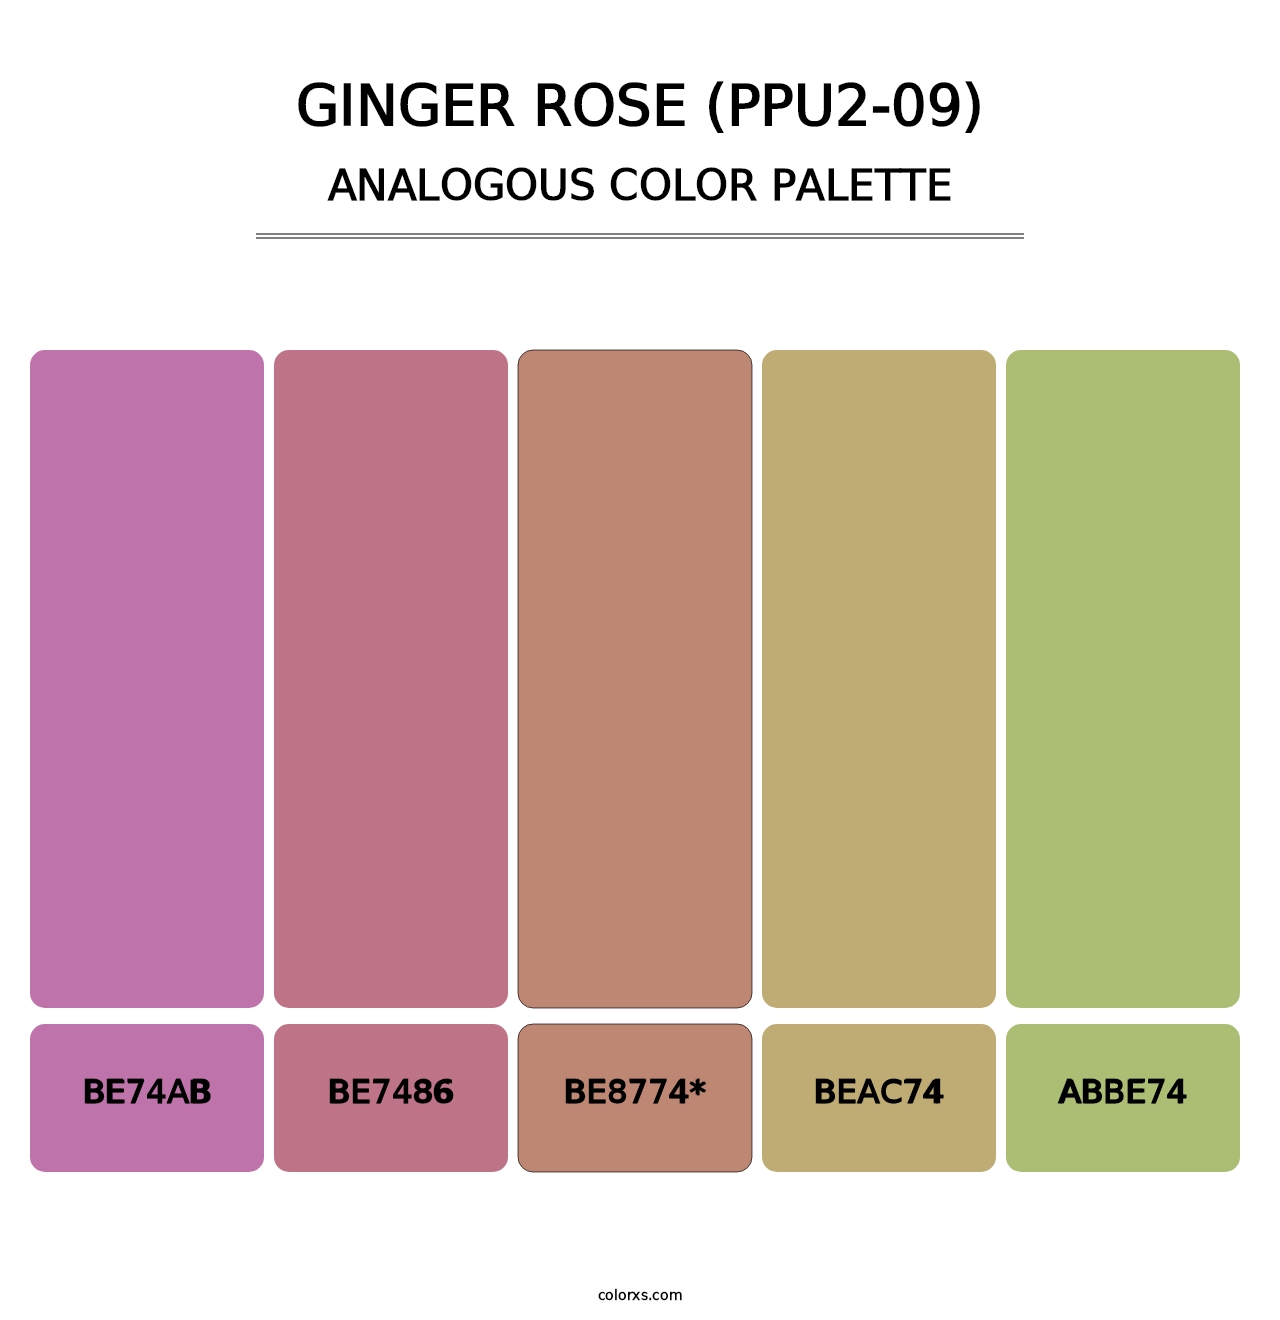 Ginger Rose (PPU2-09) - Analogous Color Palette